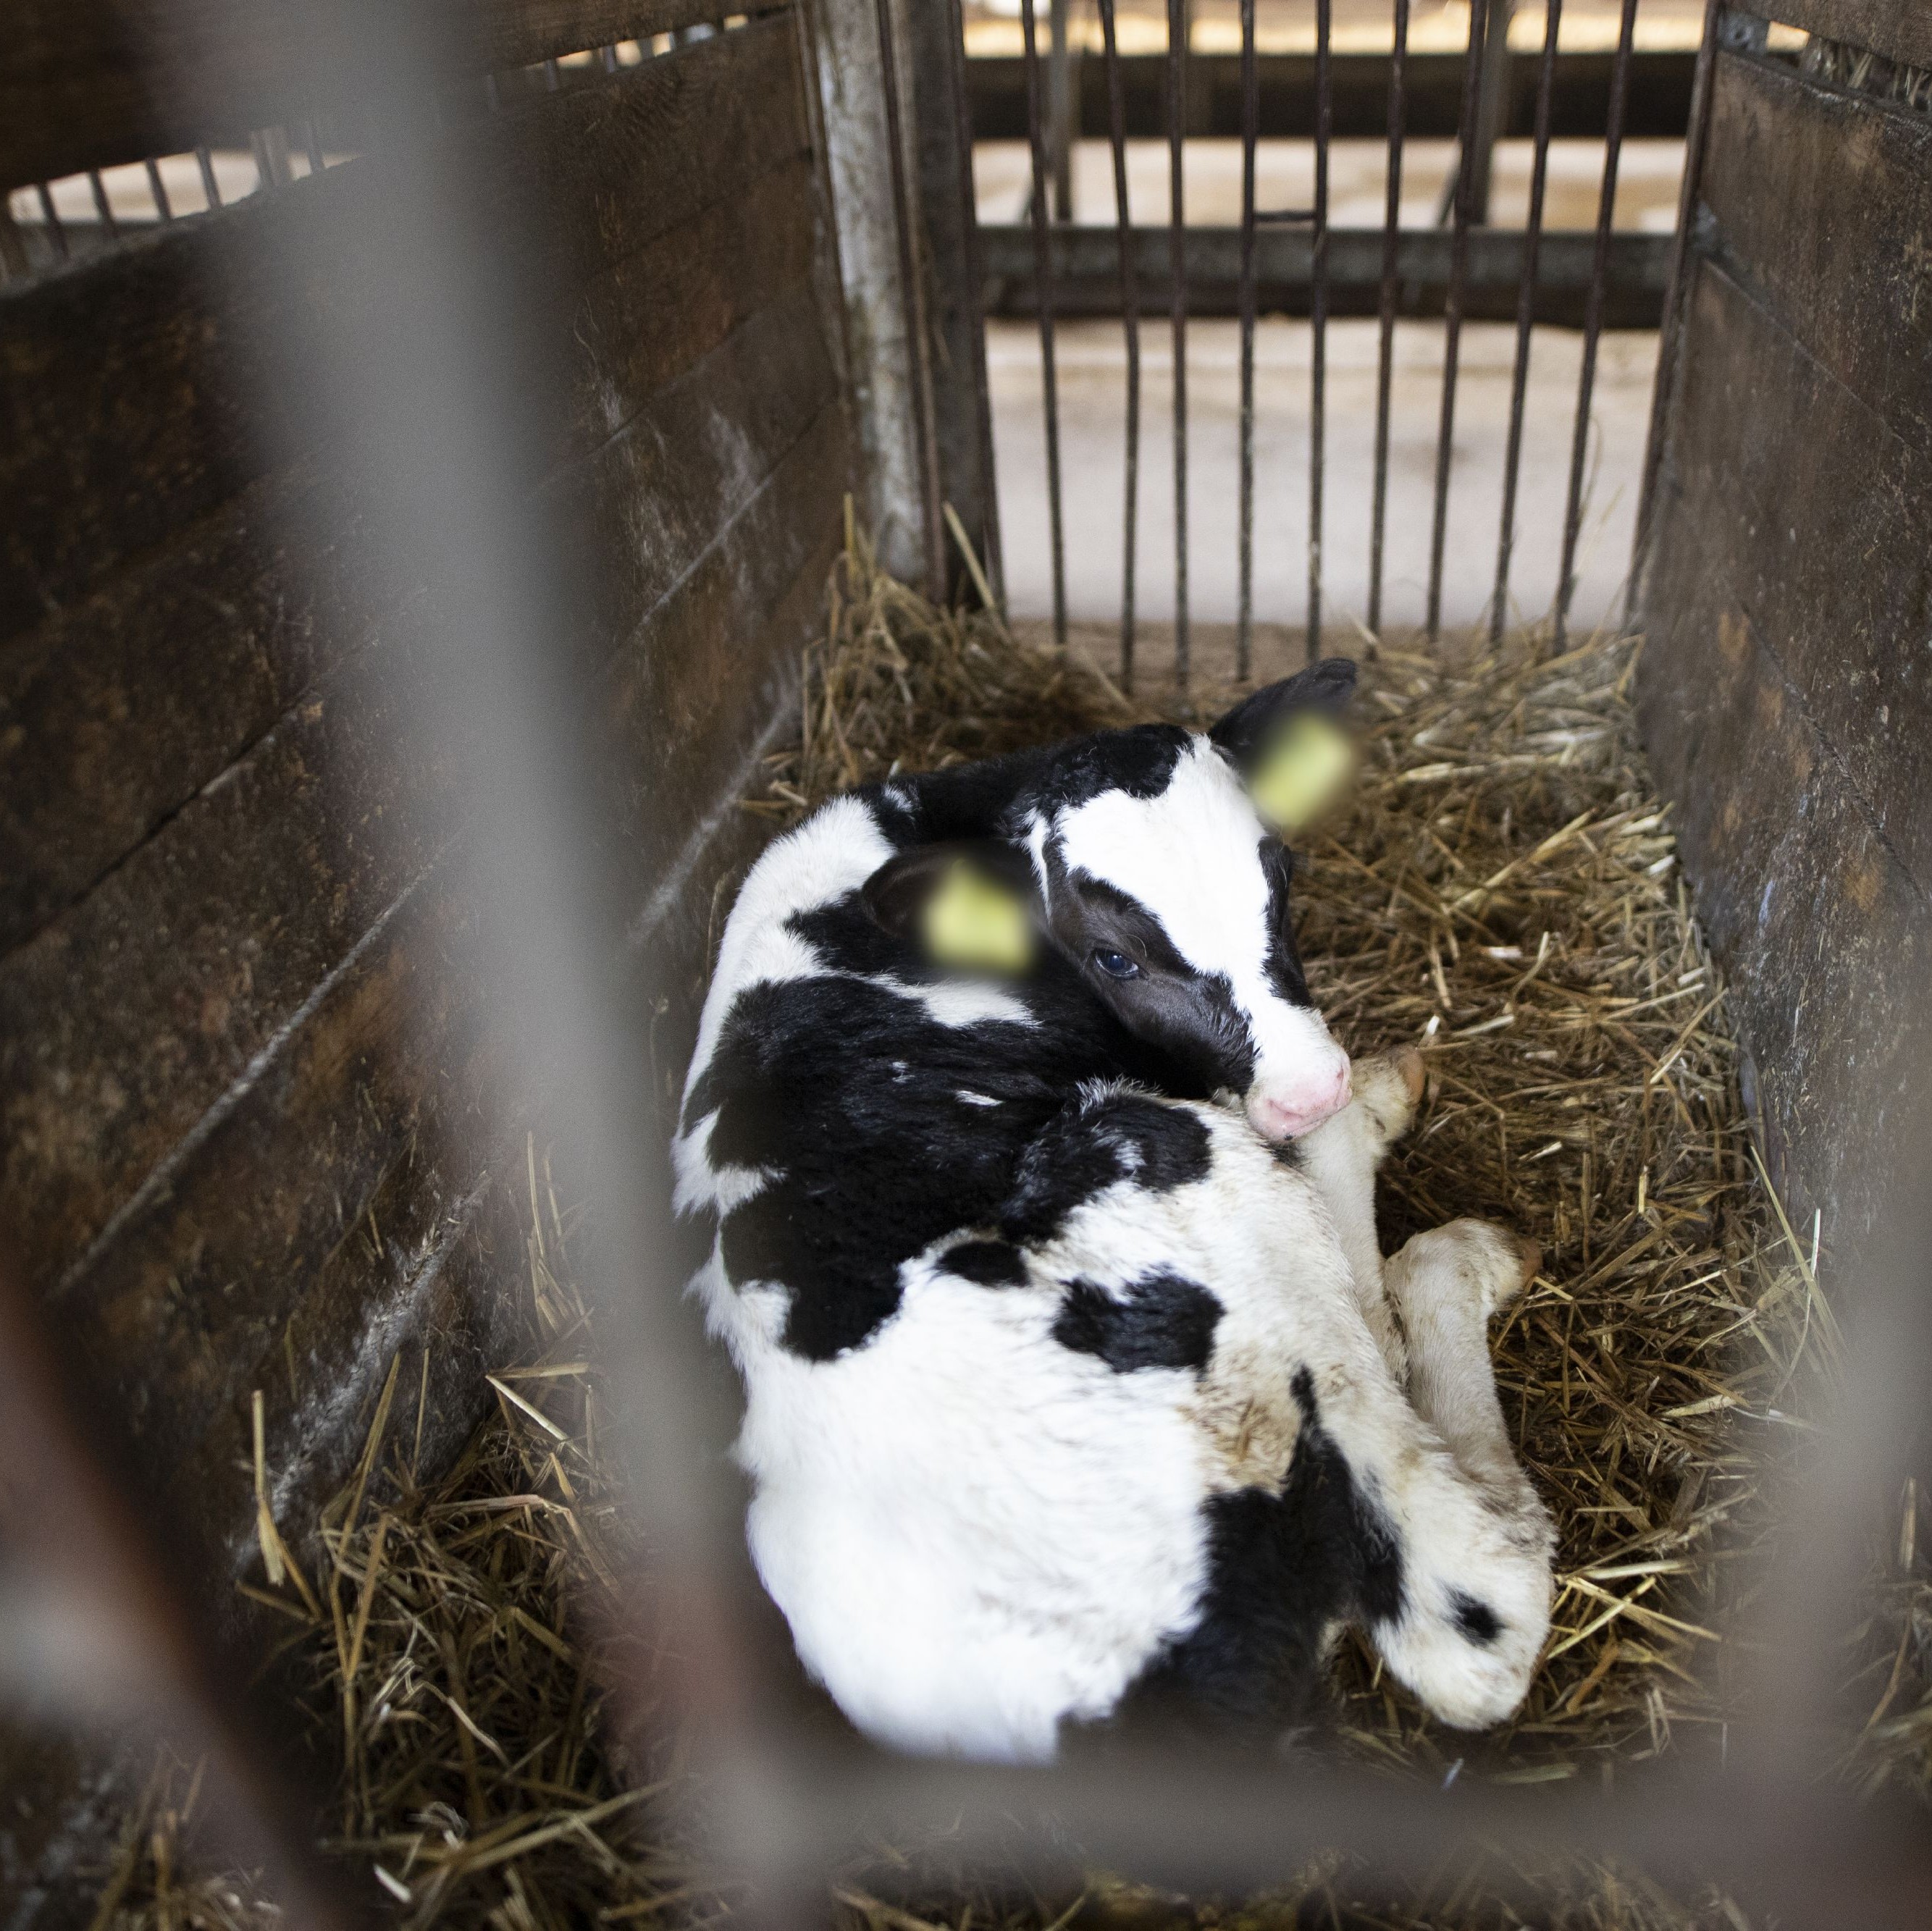 Calf kept in a cage, isolated from its mother